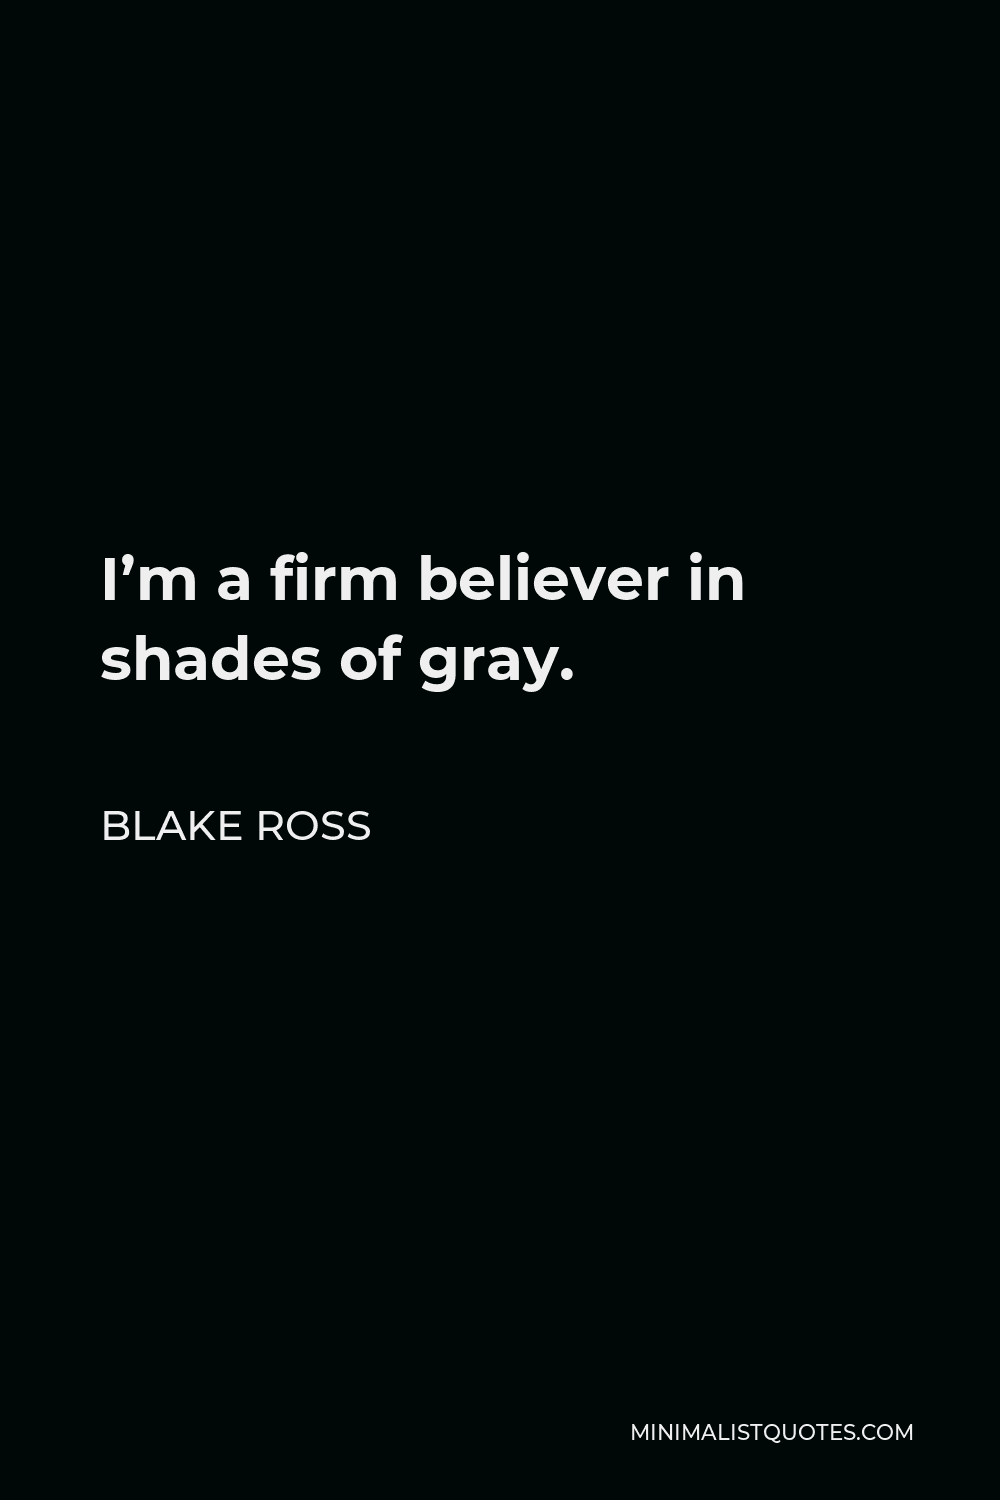 Blake Ross Quote - I’m a firm believer in shades of gray.